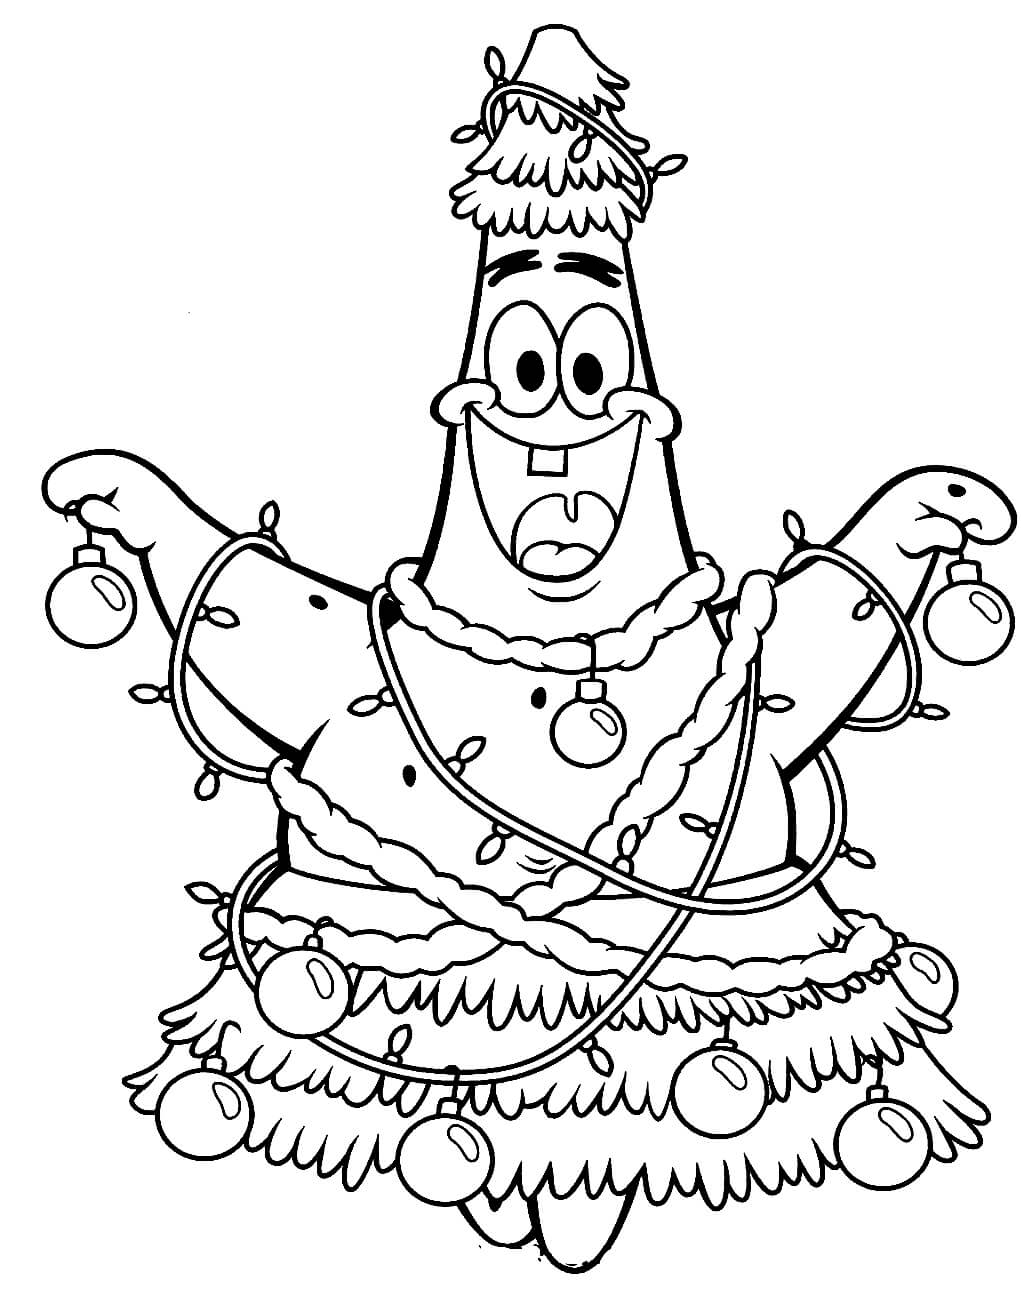 Patrick Star Coloring Pages For Christmas 20